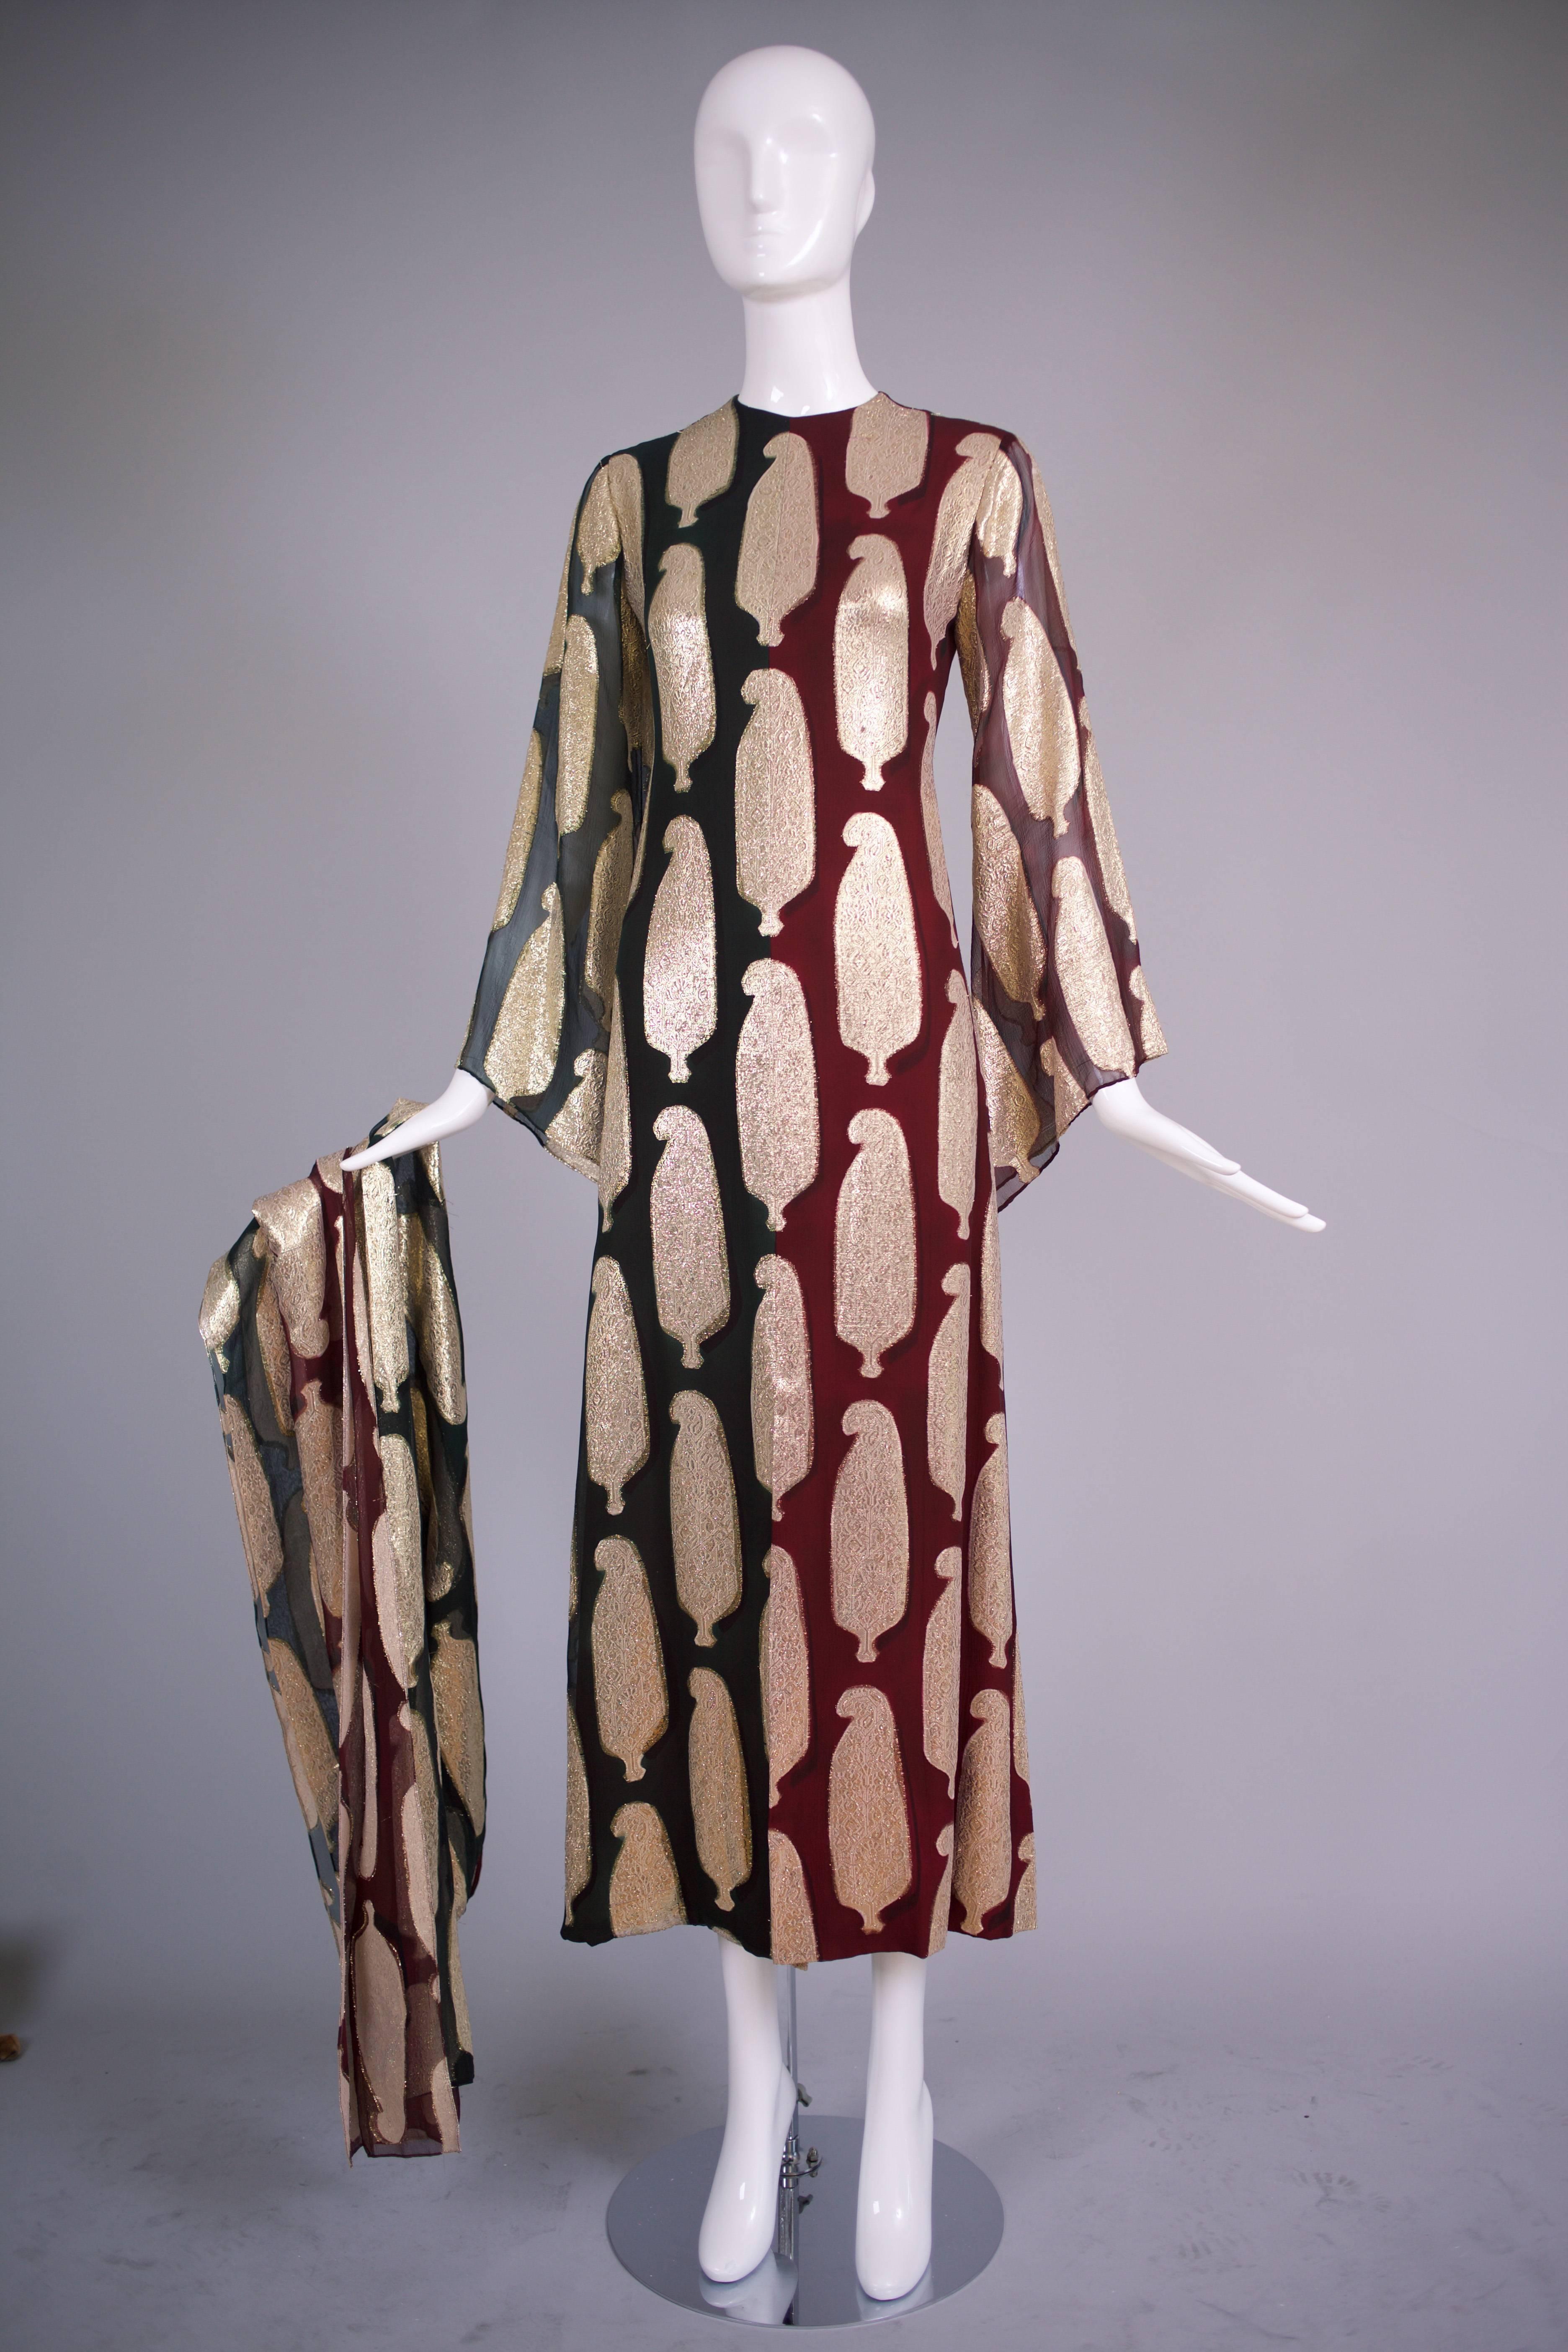 1971 Bill Blass burgundy red and hunter green chiffon and paisley gold lame gown with matching scarf. The gown is divided into two colors on its vertical axis - hunter green chiffon on the right and burgundy red chiffon on the left  half. Design